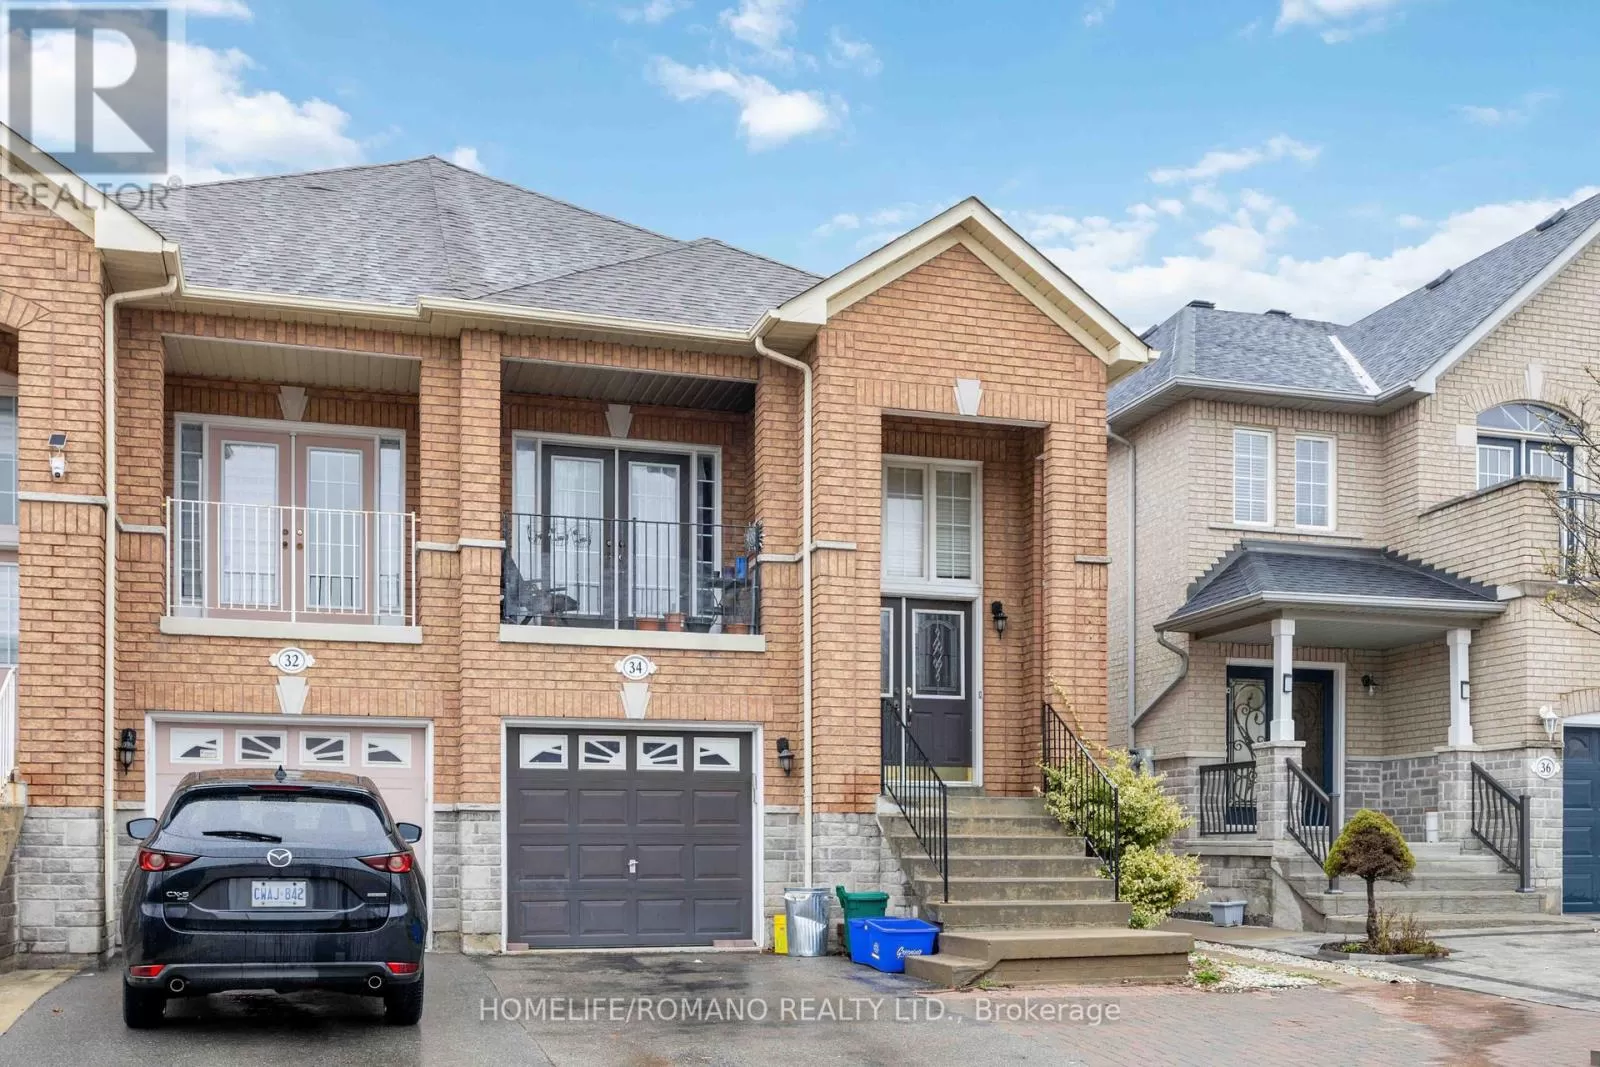 House for rent: Bsmt - 34 Gianmarco Way, Vaughan, Ontario L6A 3J3